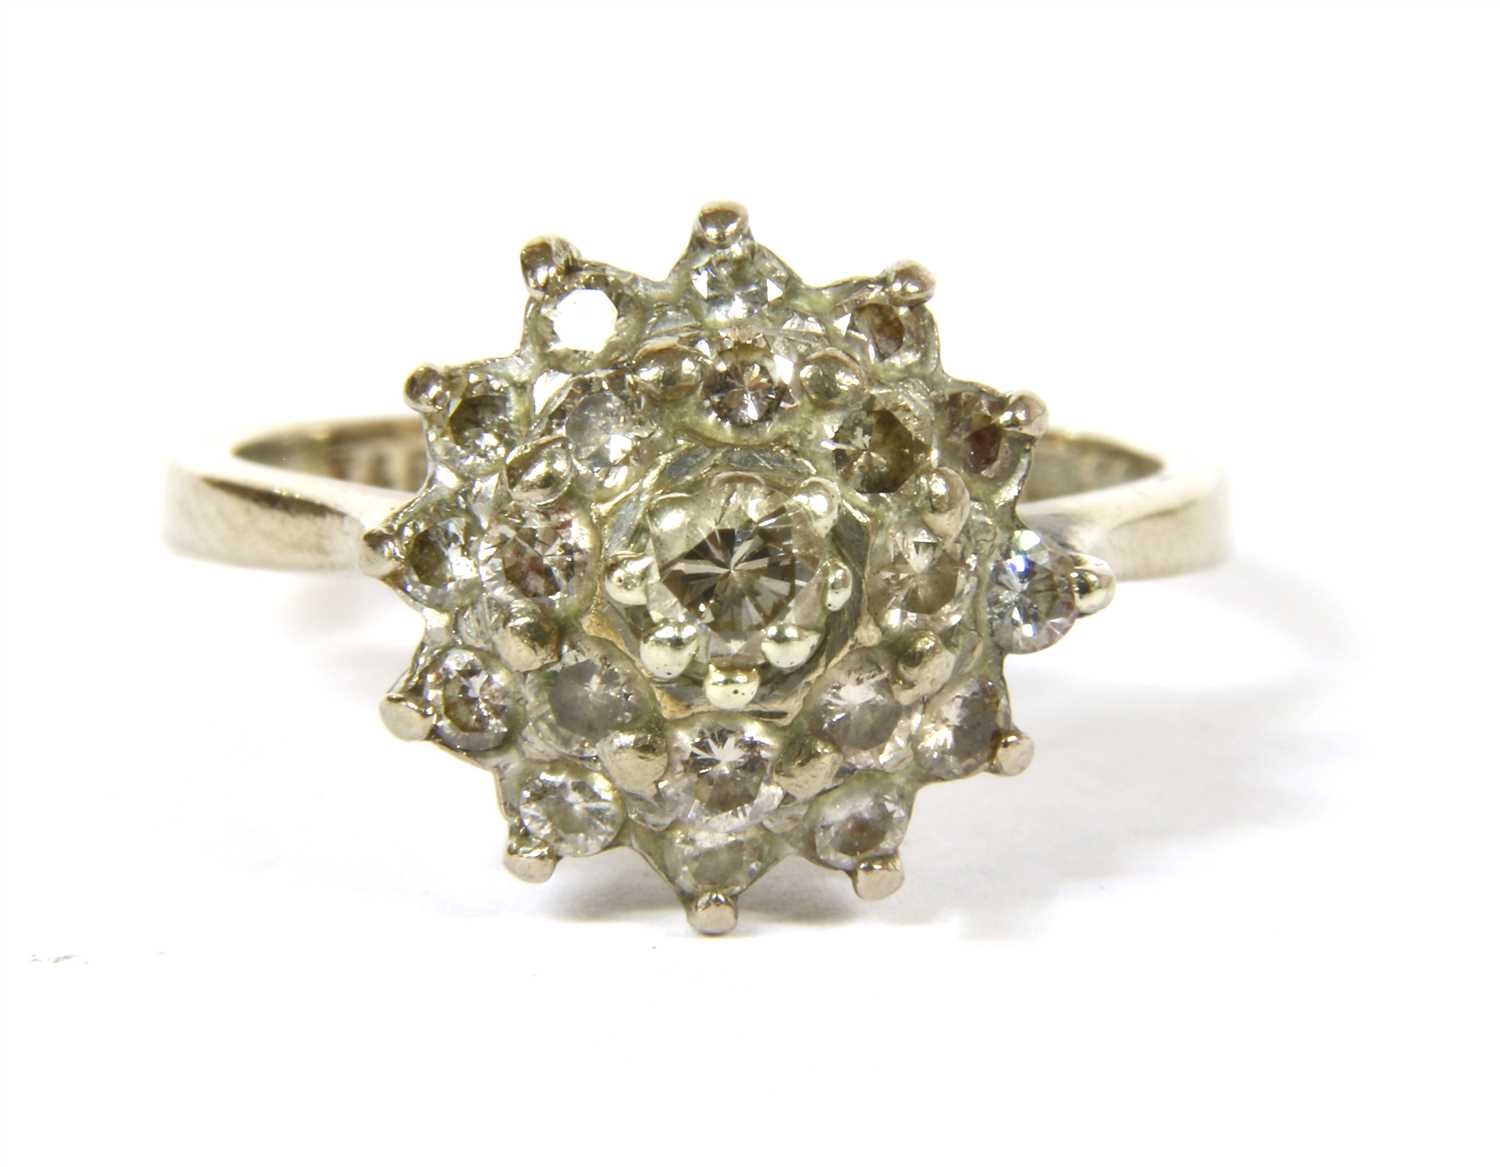 Lot 5 - An 18ct white gold three tier diamond cluster ring